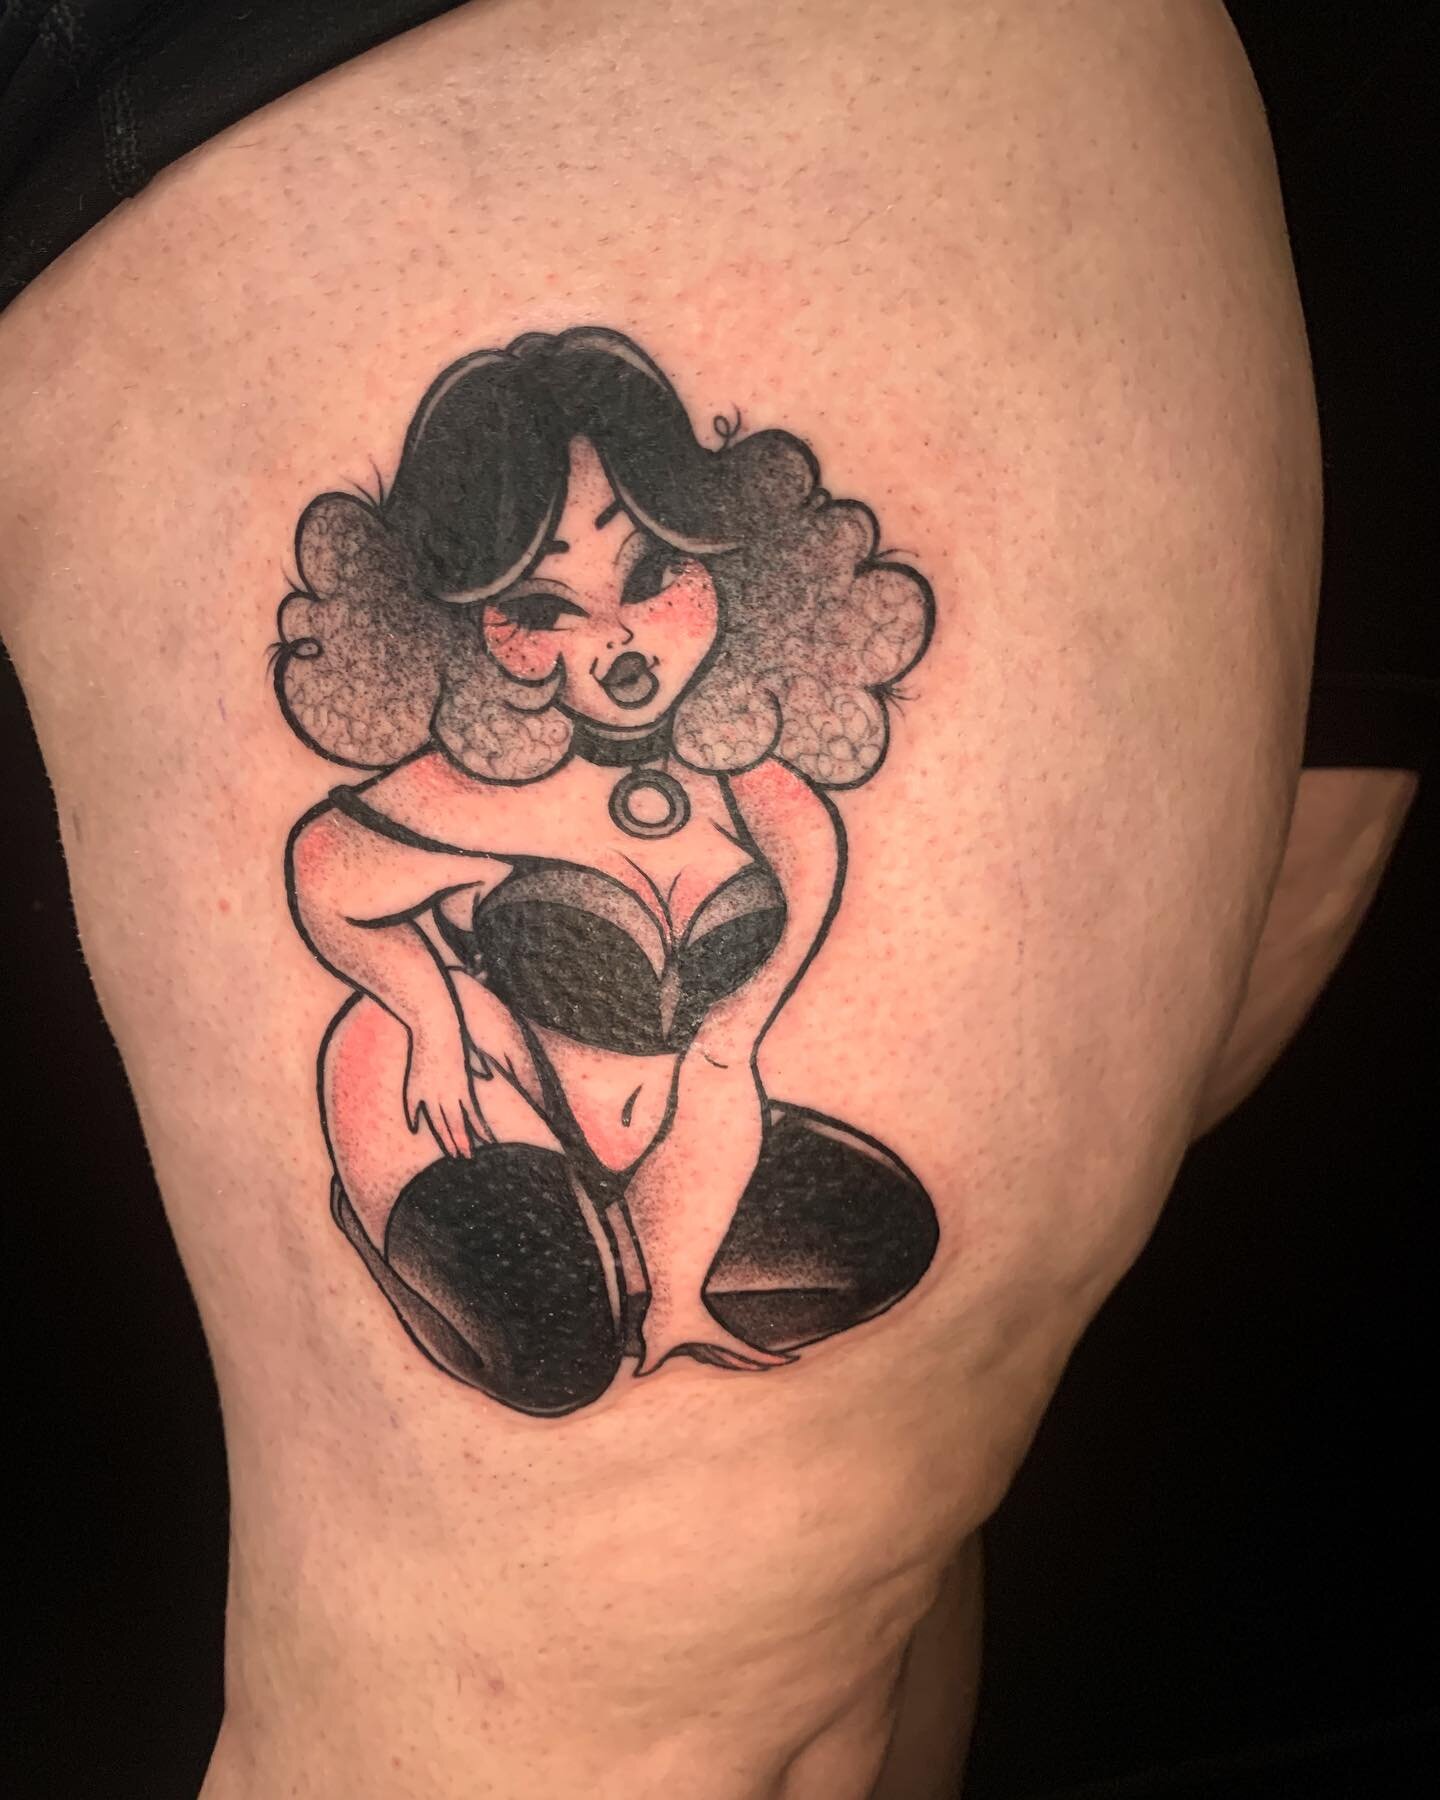 Curly hair cutie!
Done at @vilainstattoo 
.
.
.
***I&rsquo;m only designing tattoos for people who can come to Montreal to get the tattoo. I won&rsquo;t answer messages otherwise. Please don&rsquo;t use my art without my consent.*** *I do not tattoo 